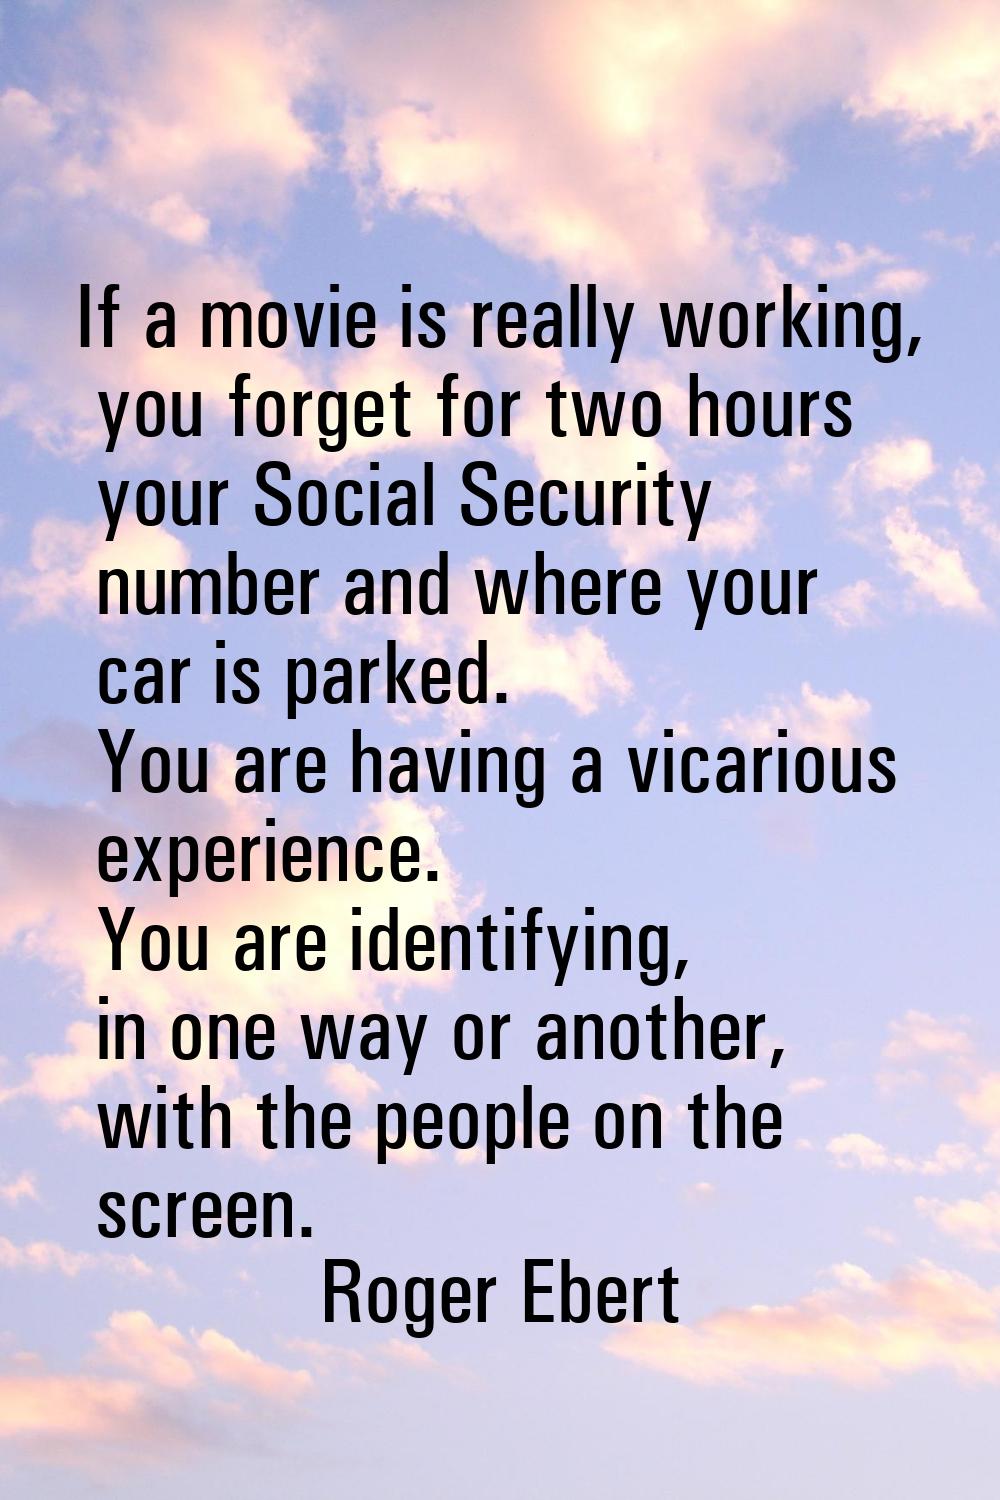 If a movie is really working, you forget for two hours your Social Security number and where your c